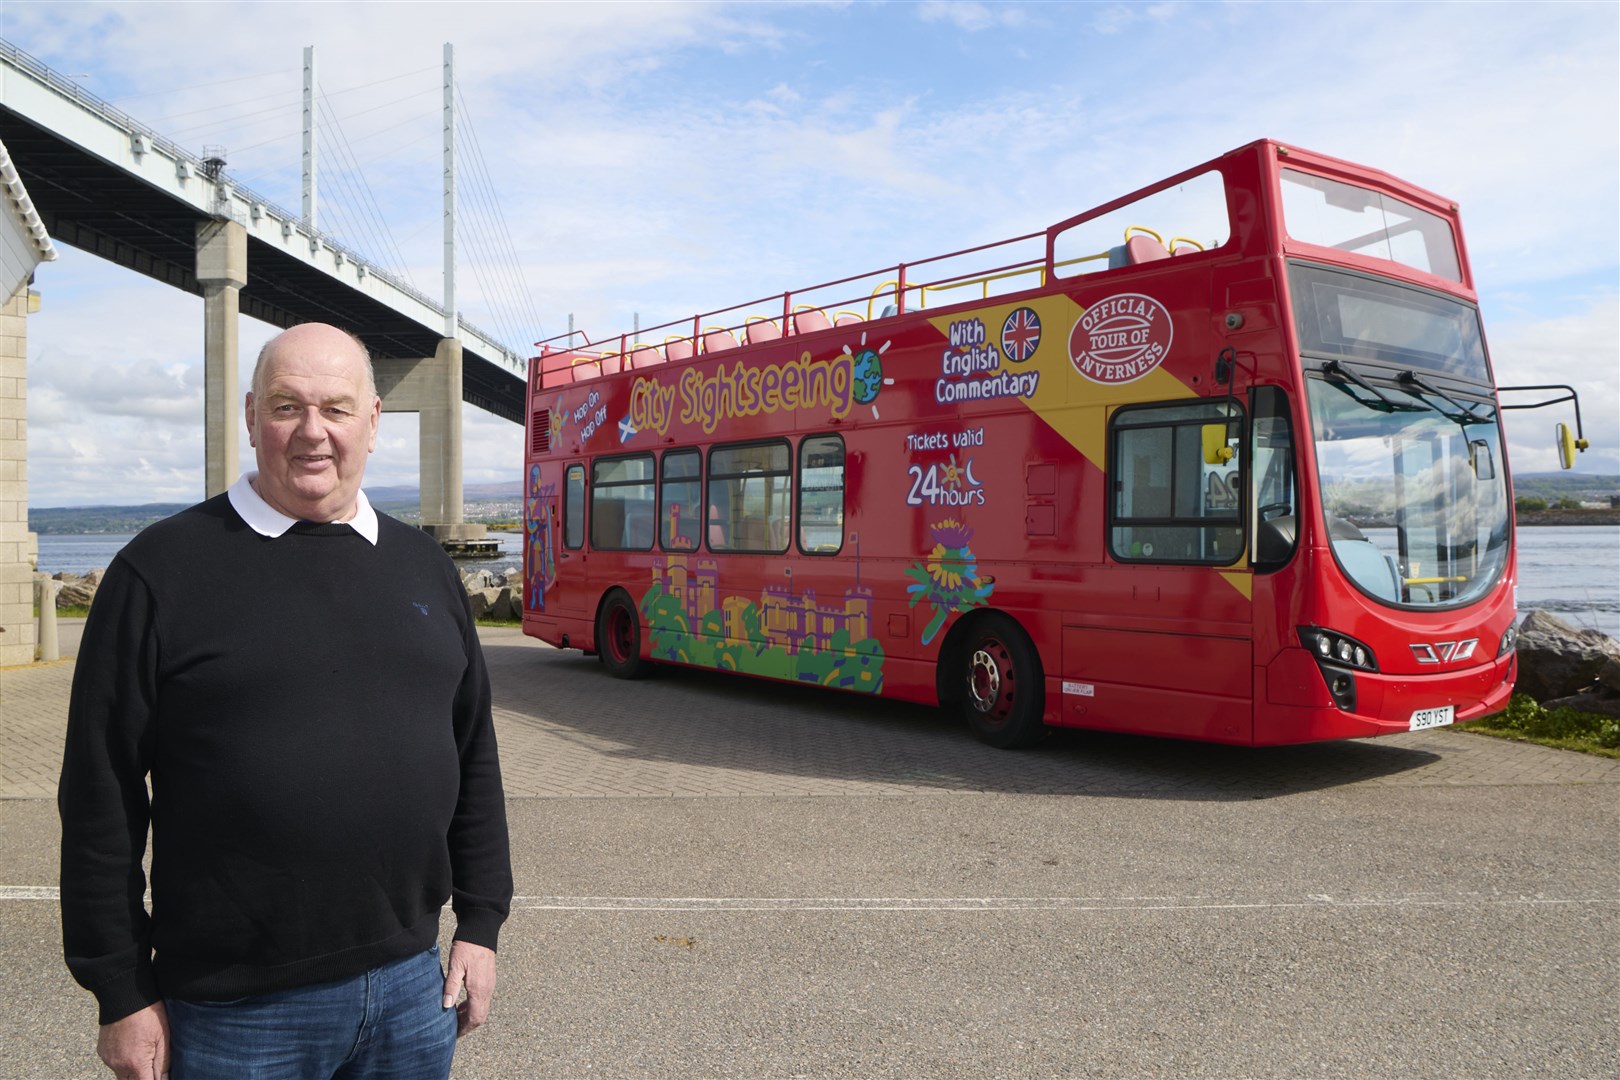 Donald Mathieson, D & E MD, with one of their new City Sightseeing Buses